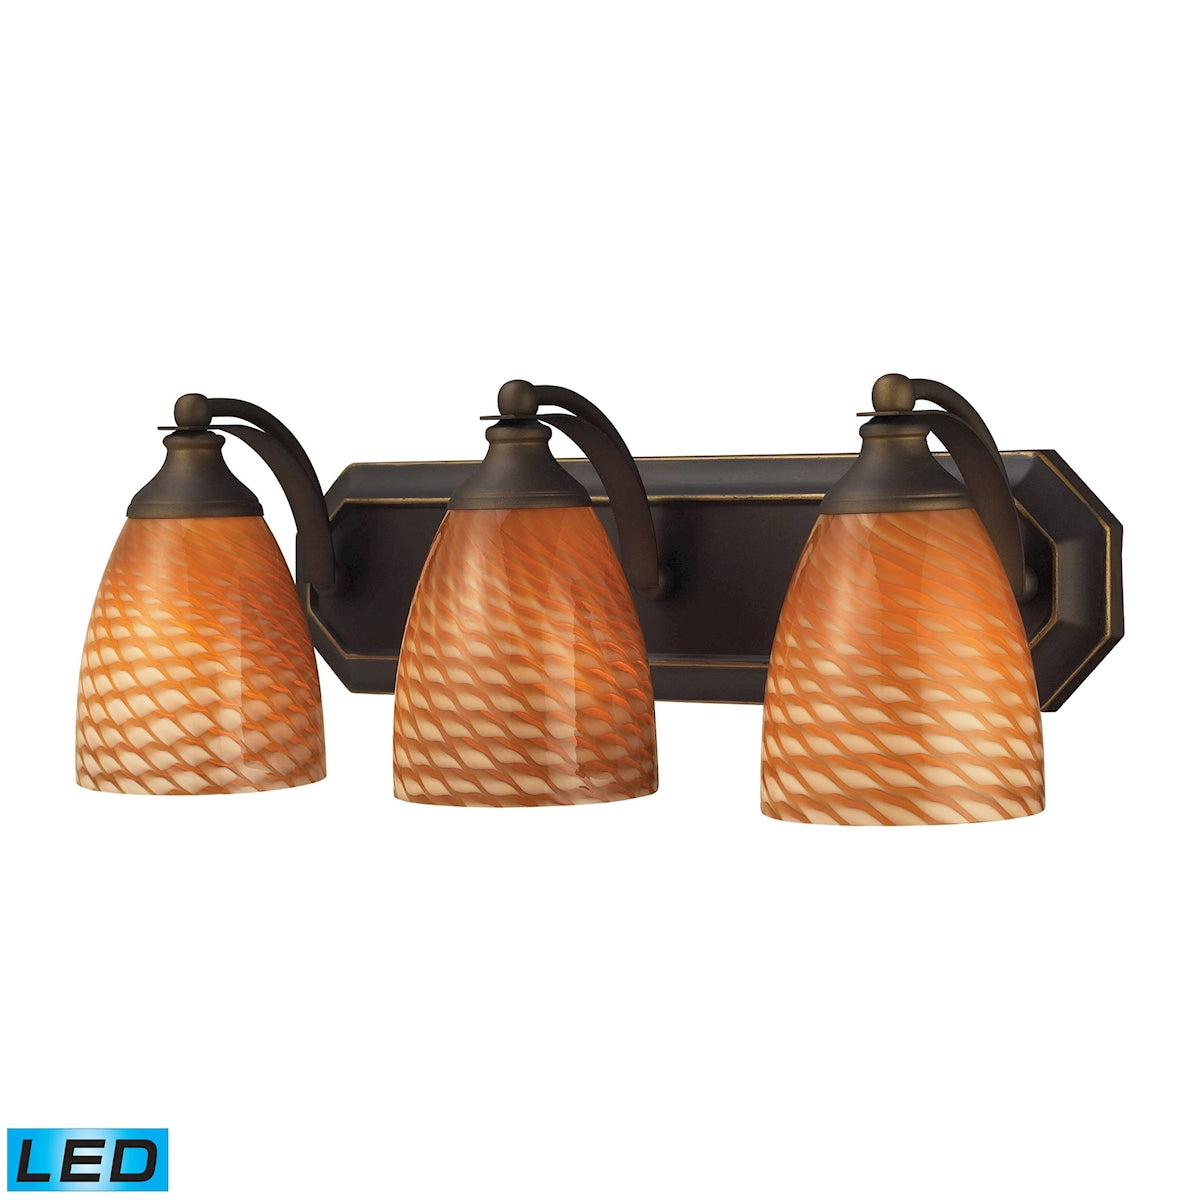 ELK Lighting 570-3B-C-LED Mix-N-Match Vanity 3-Light Wall Lamp in Aged Bronze with Cocoa Glass - Includes LED Bulbs